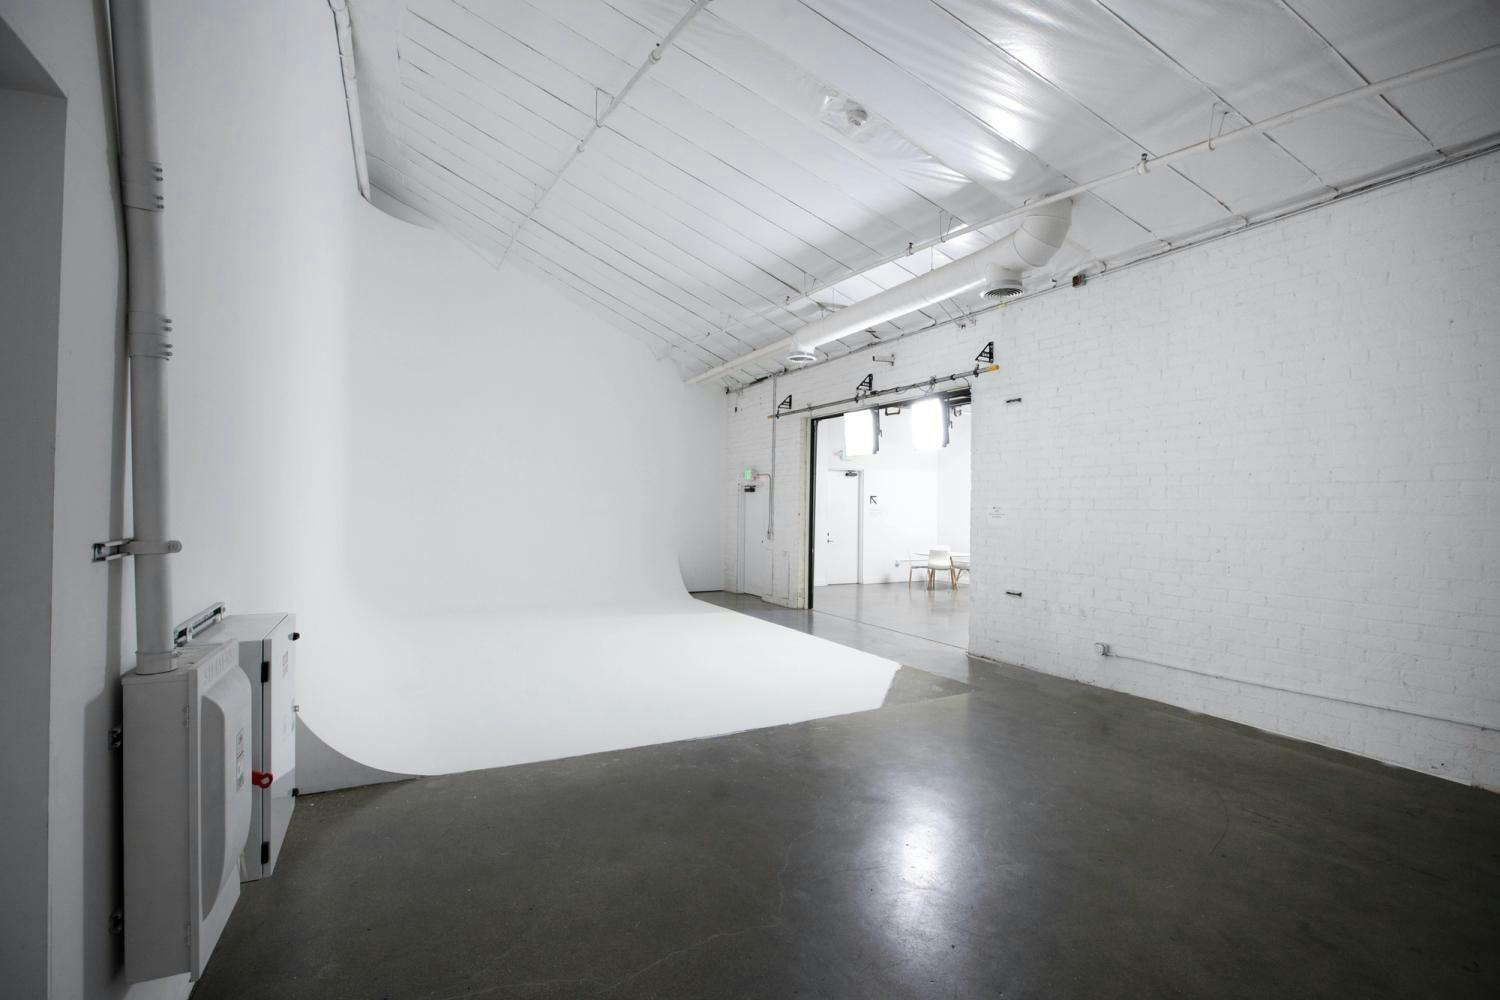  A modern photo studio with a white cyclorama, glossy concrete flooring, and white brick walls under a white industrial ceiling.